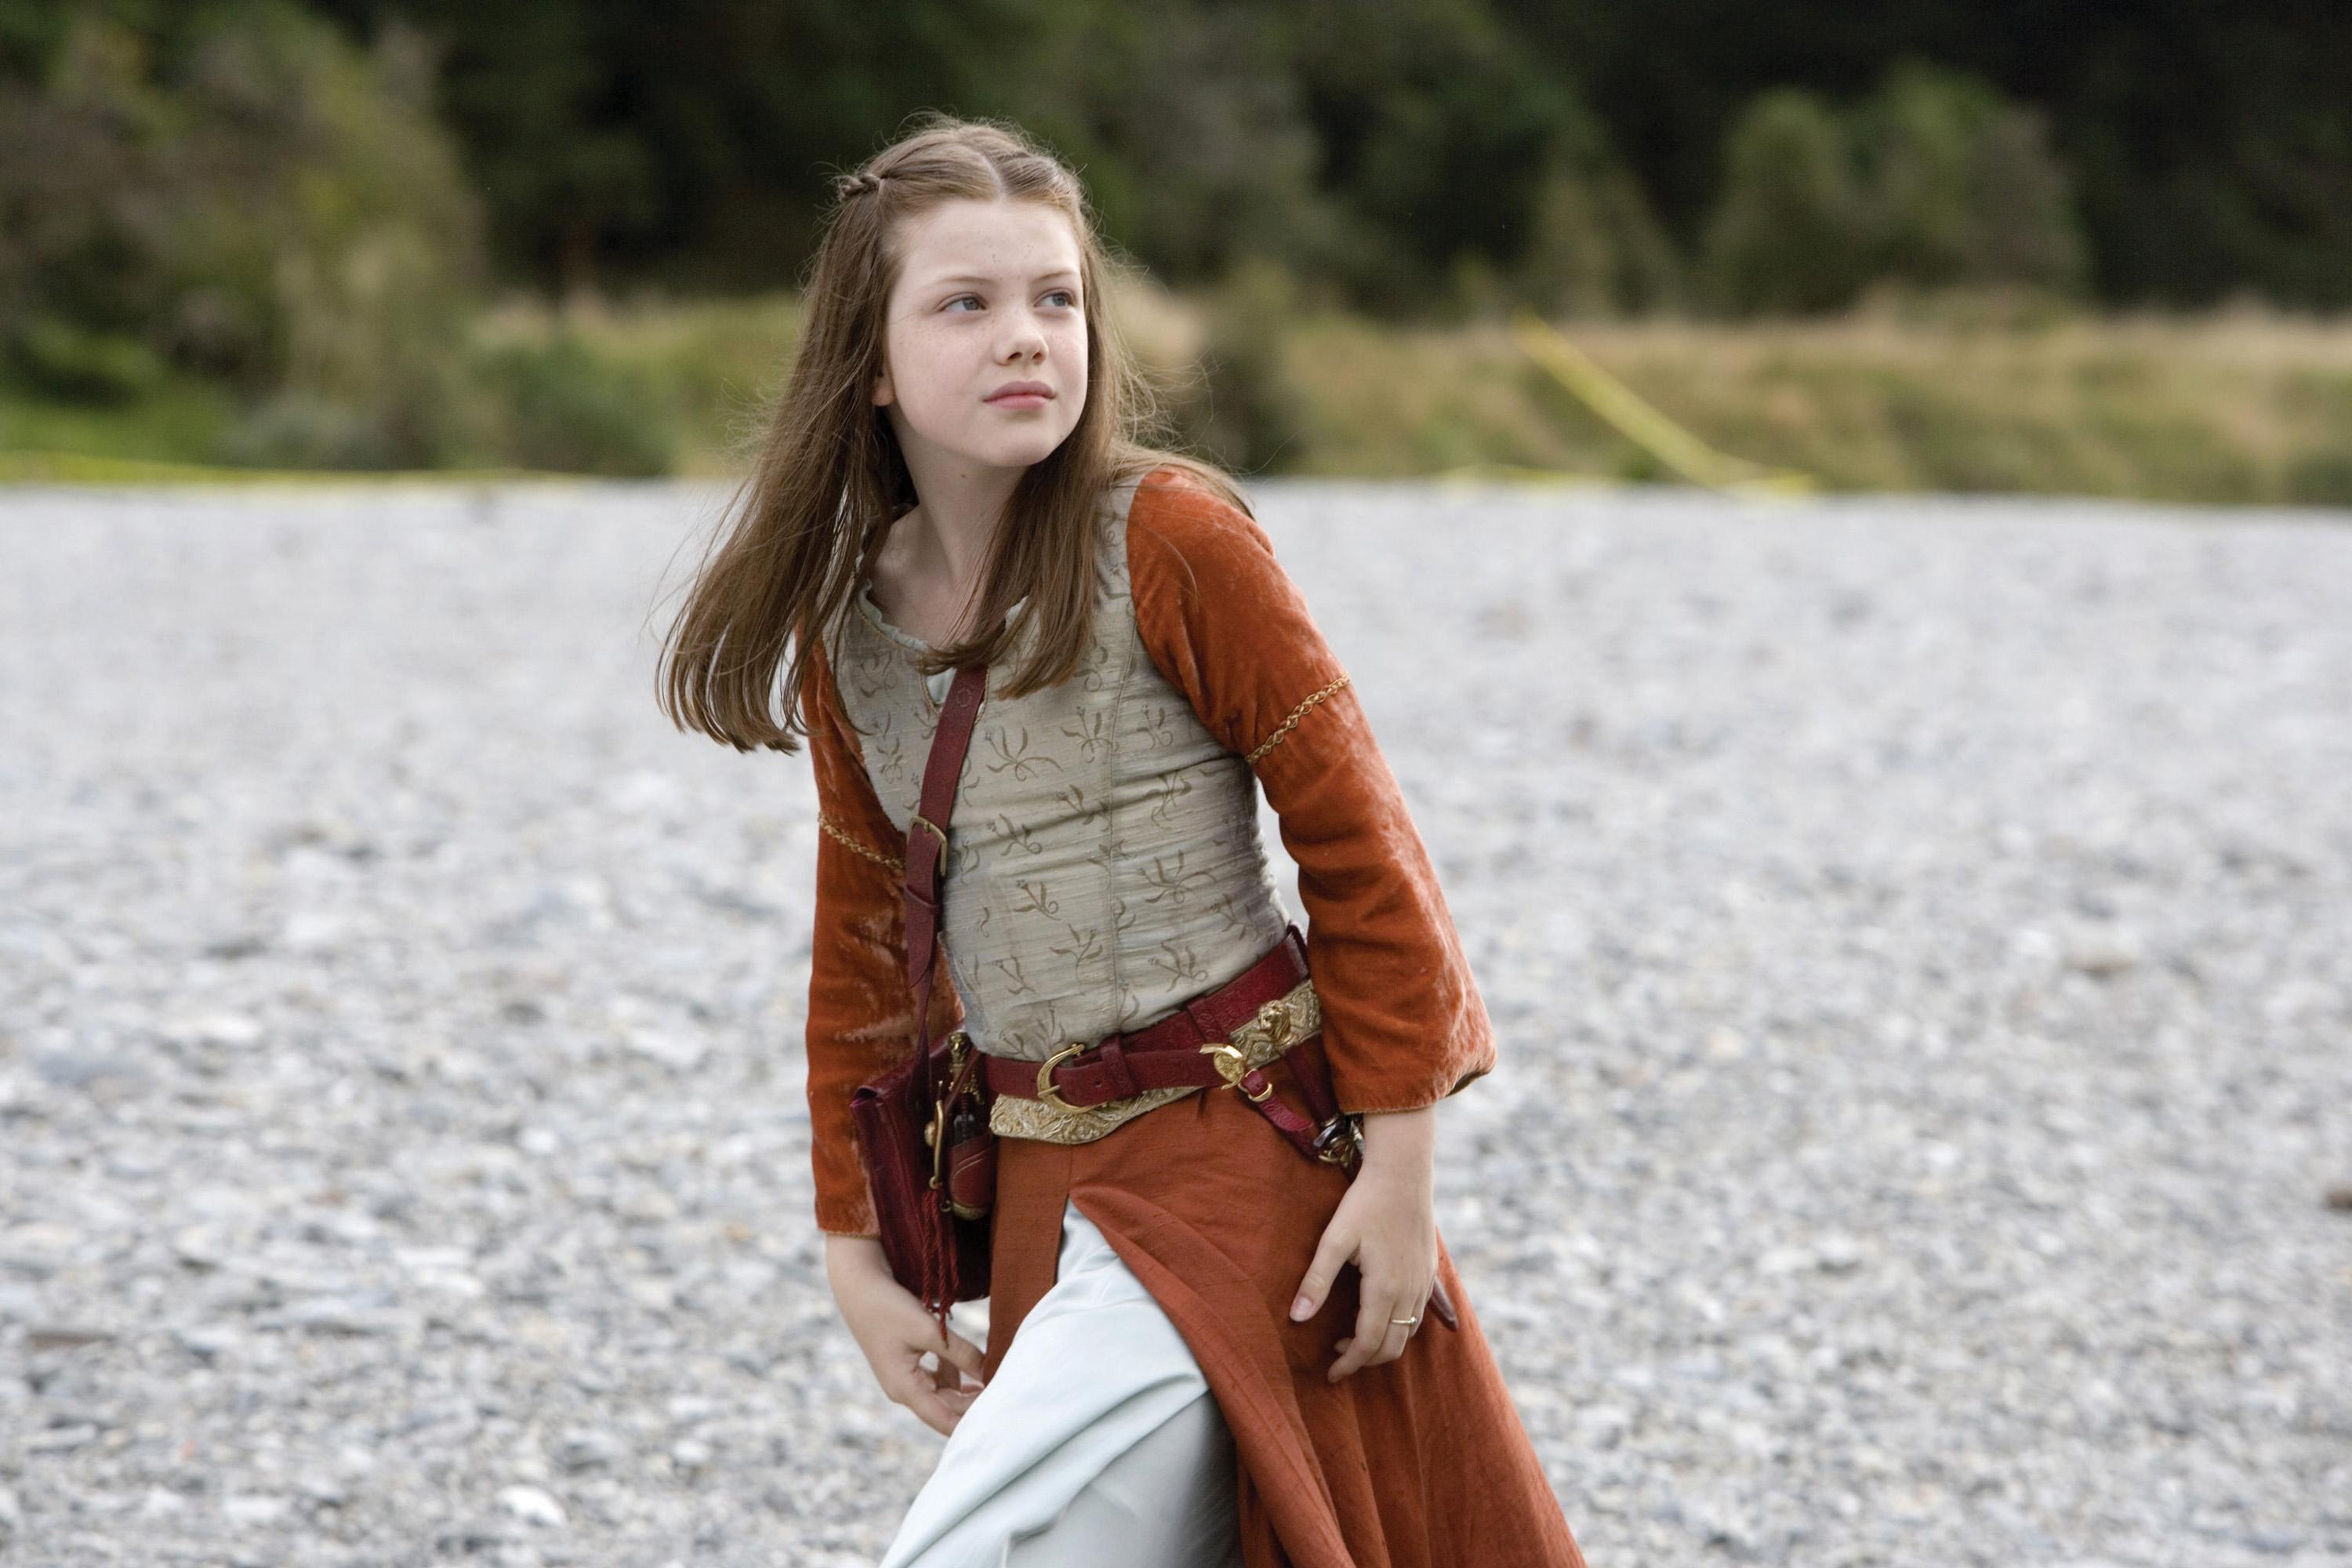 Lucy Chronicles Of Narnia Costume & Sc 1 St Best Wallpapers.